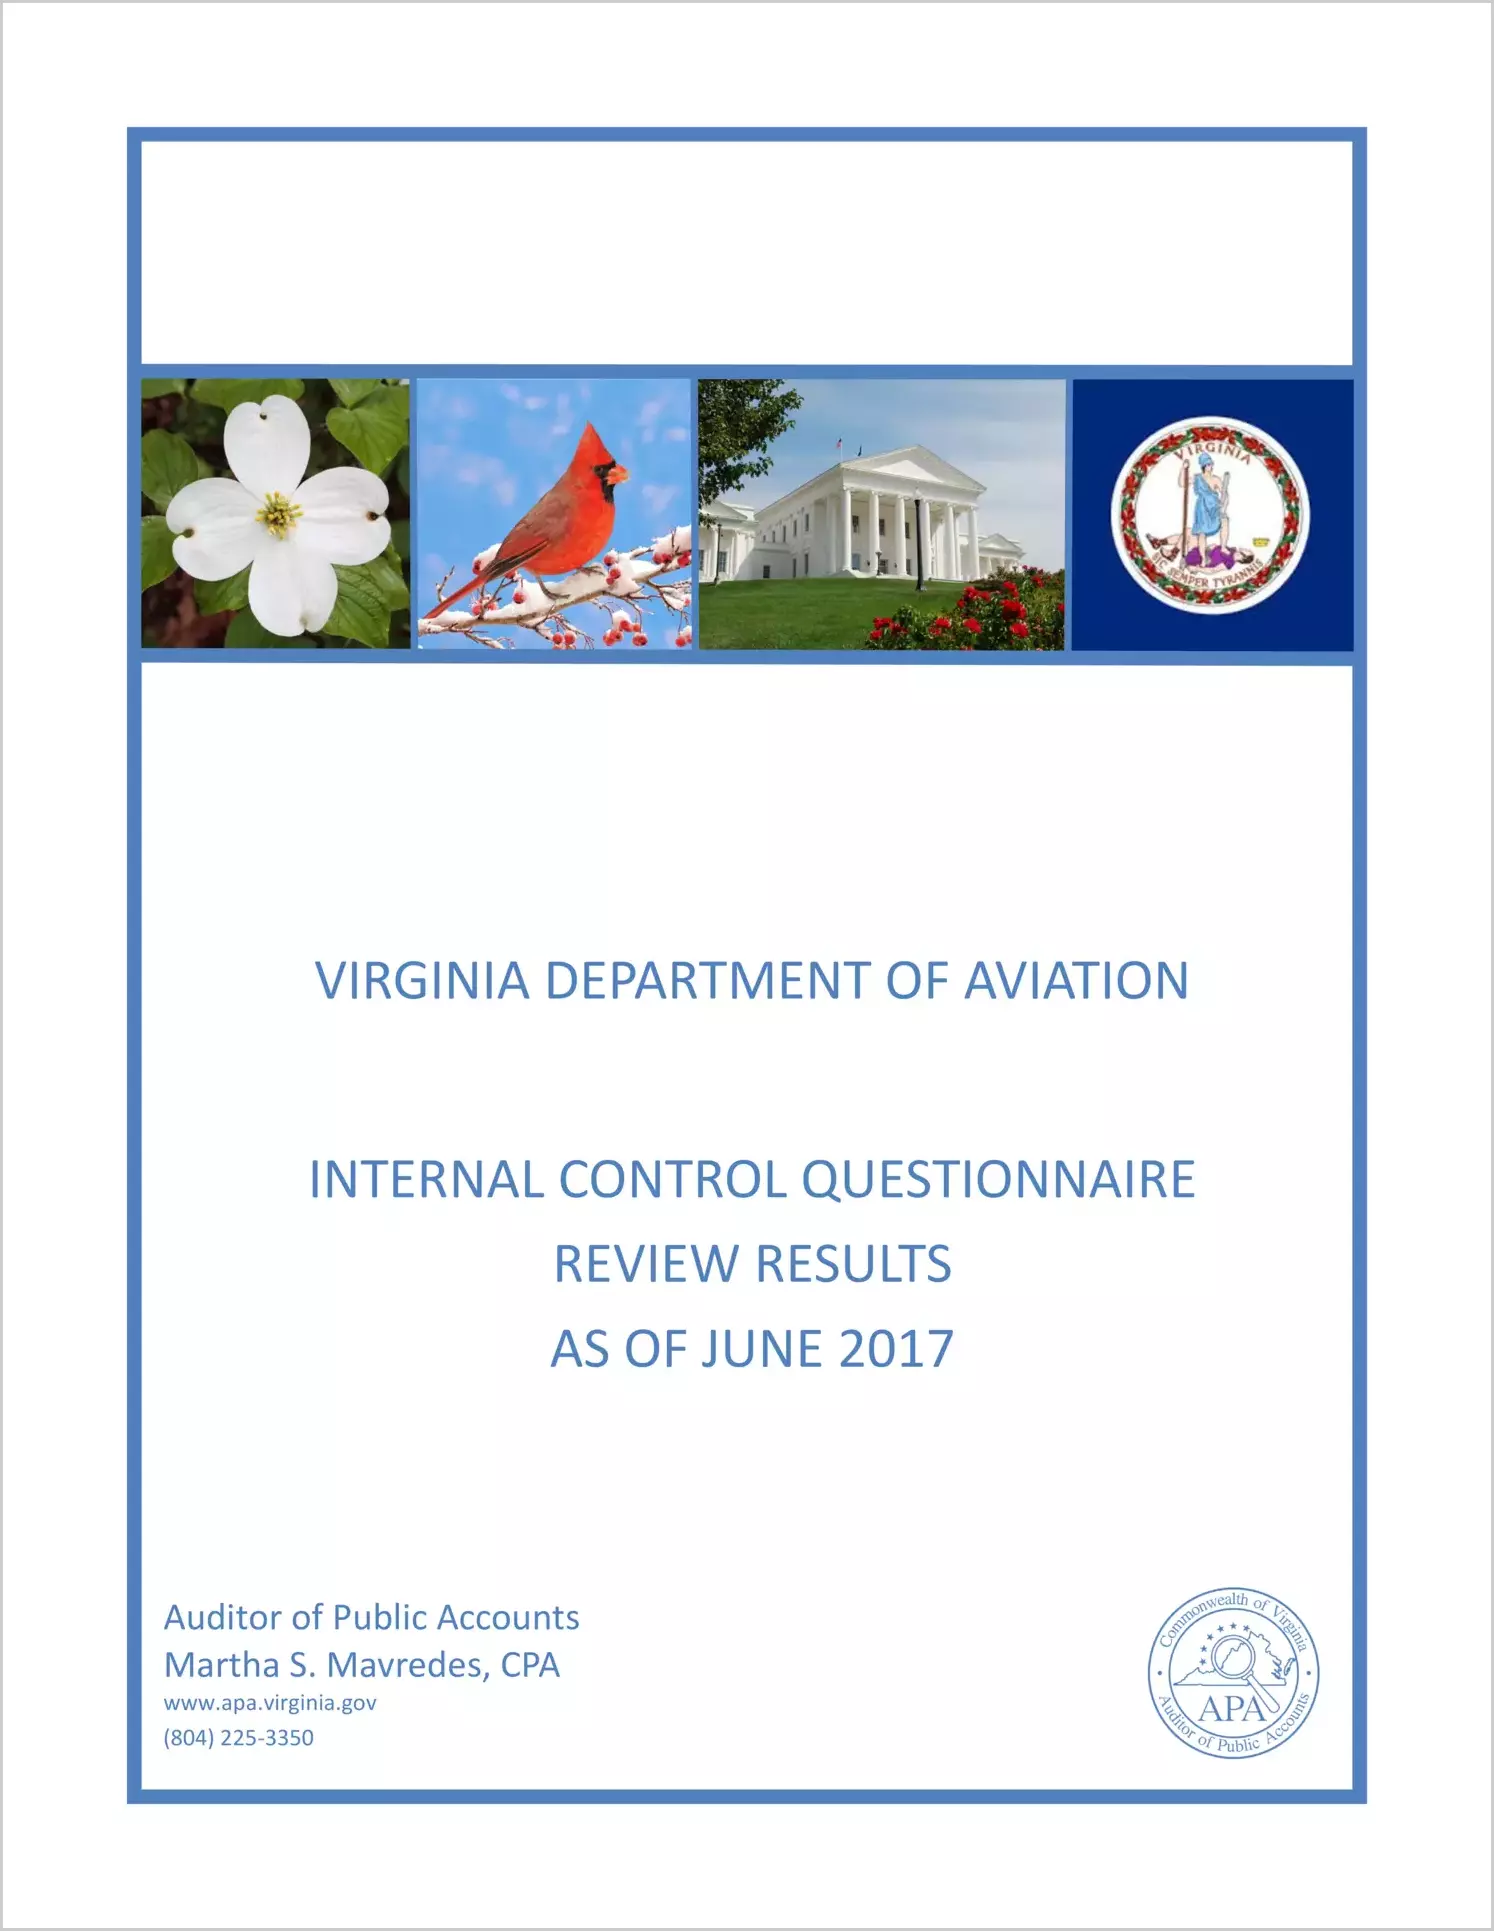 Virginia Department of Aviation Internal Control Questionnaire Review Results as of June 2017